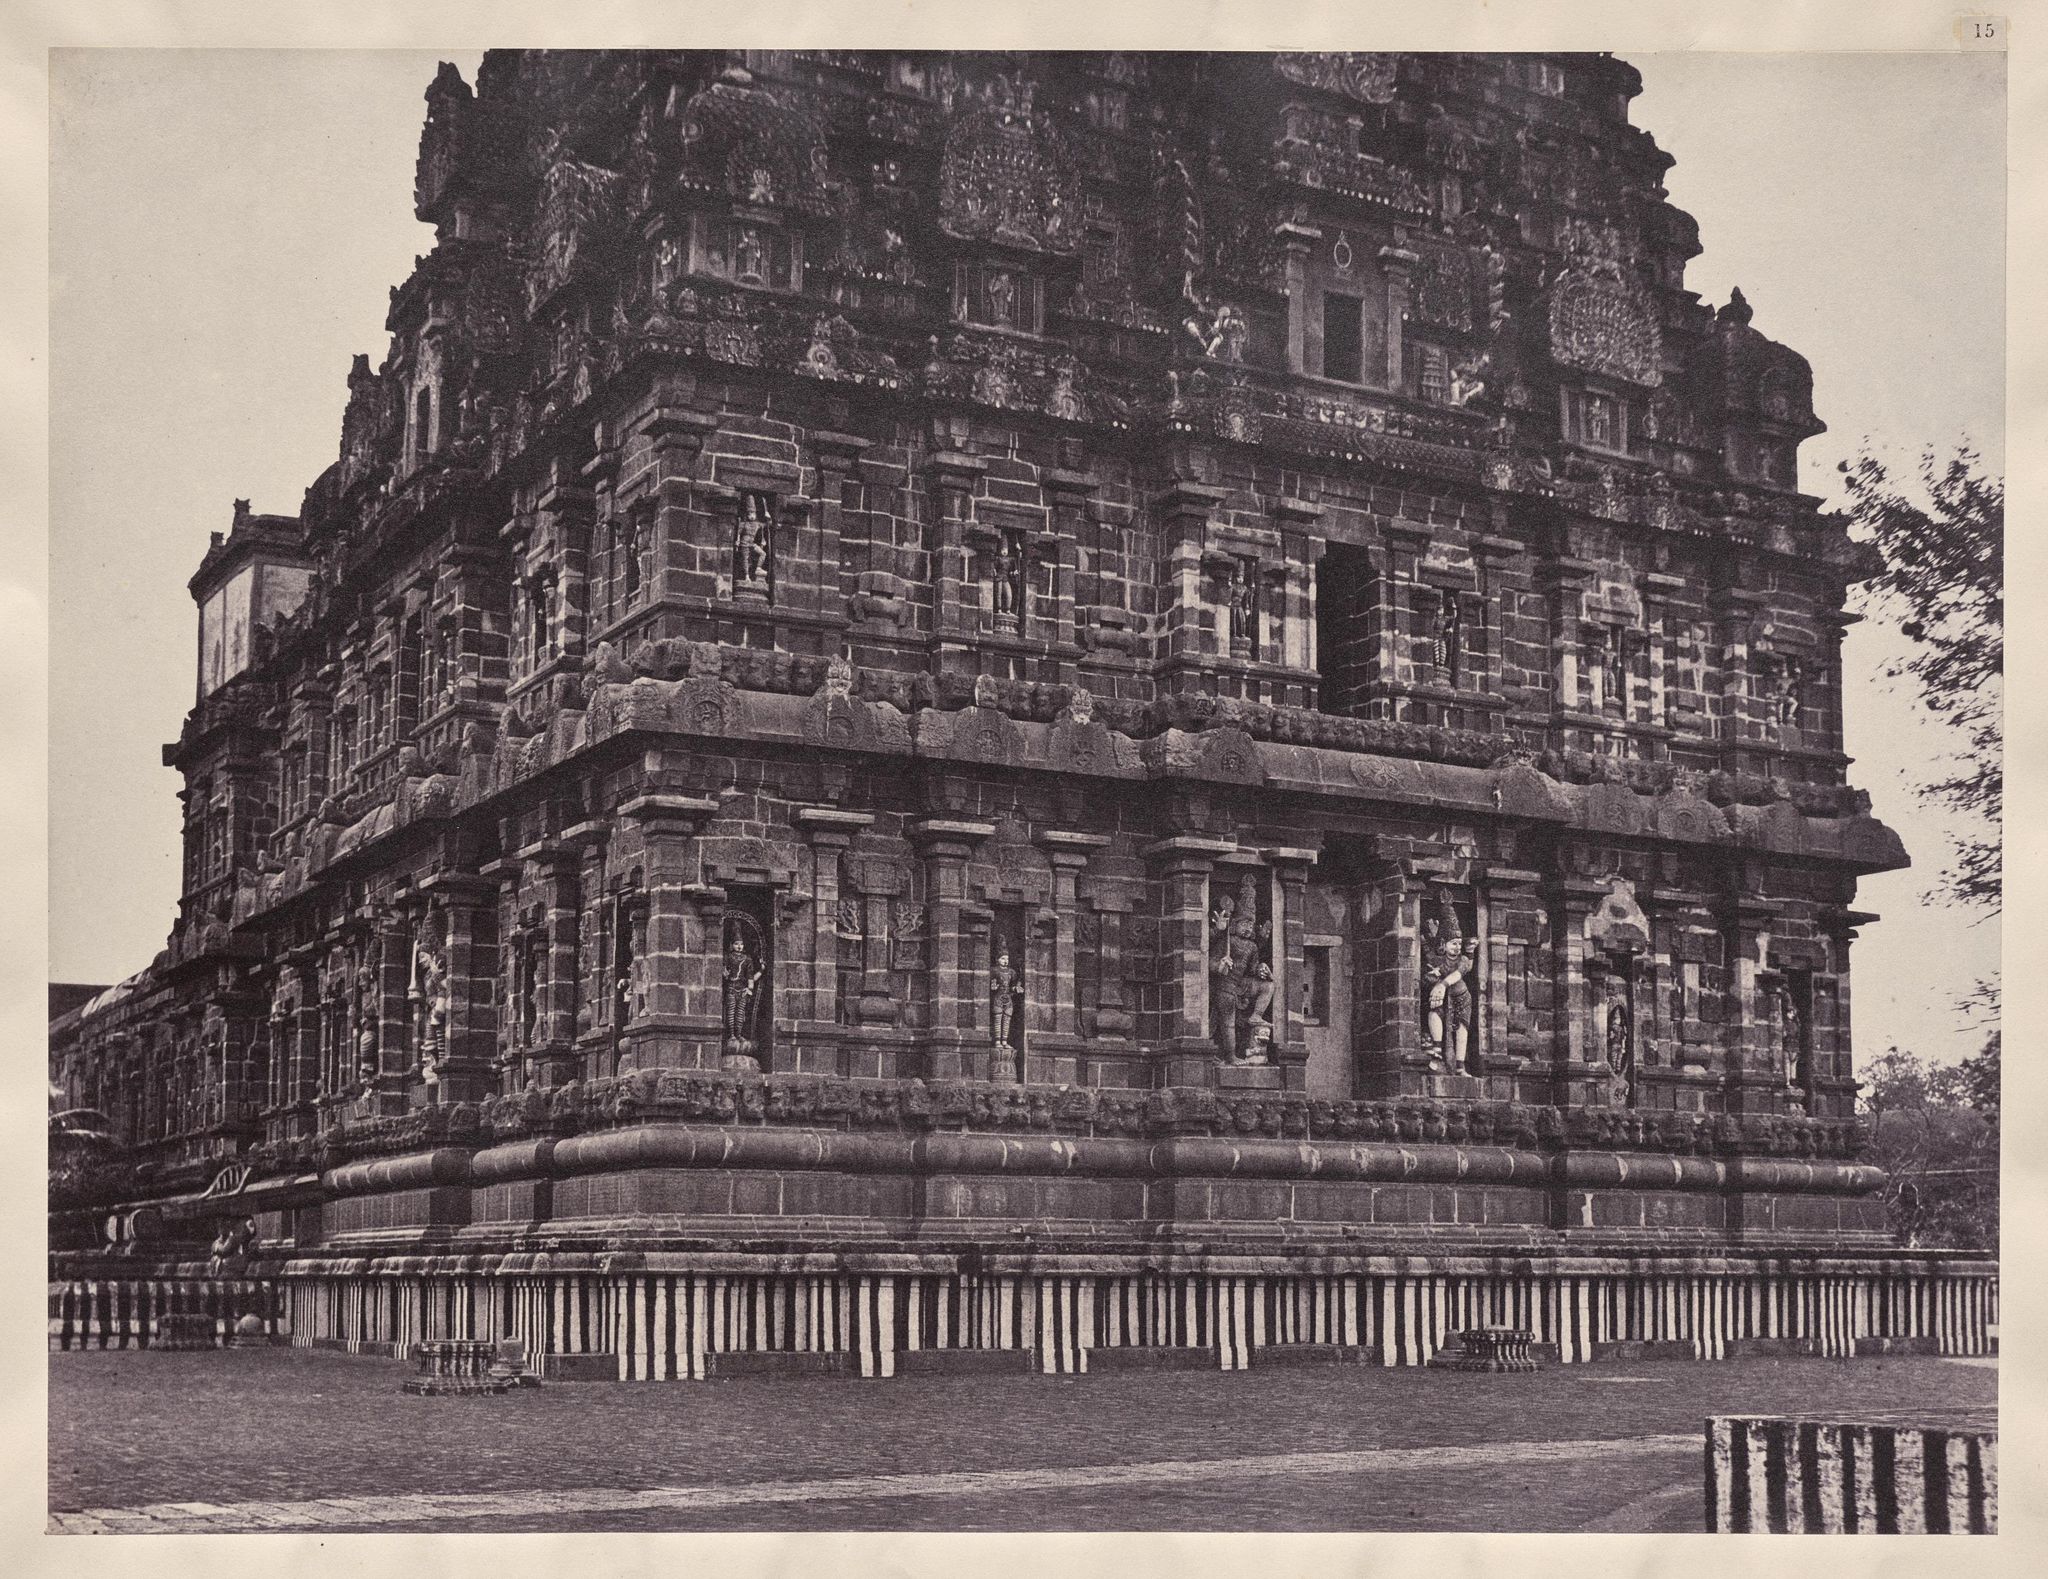 West and South Sides of the Vimana Walls, Great Temple, Thanjavur